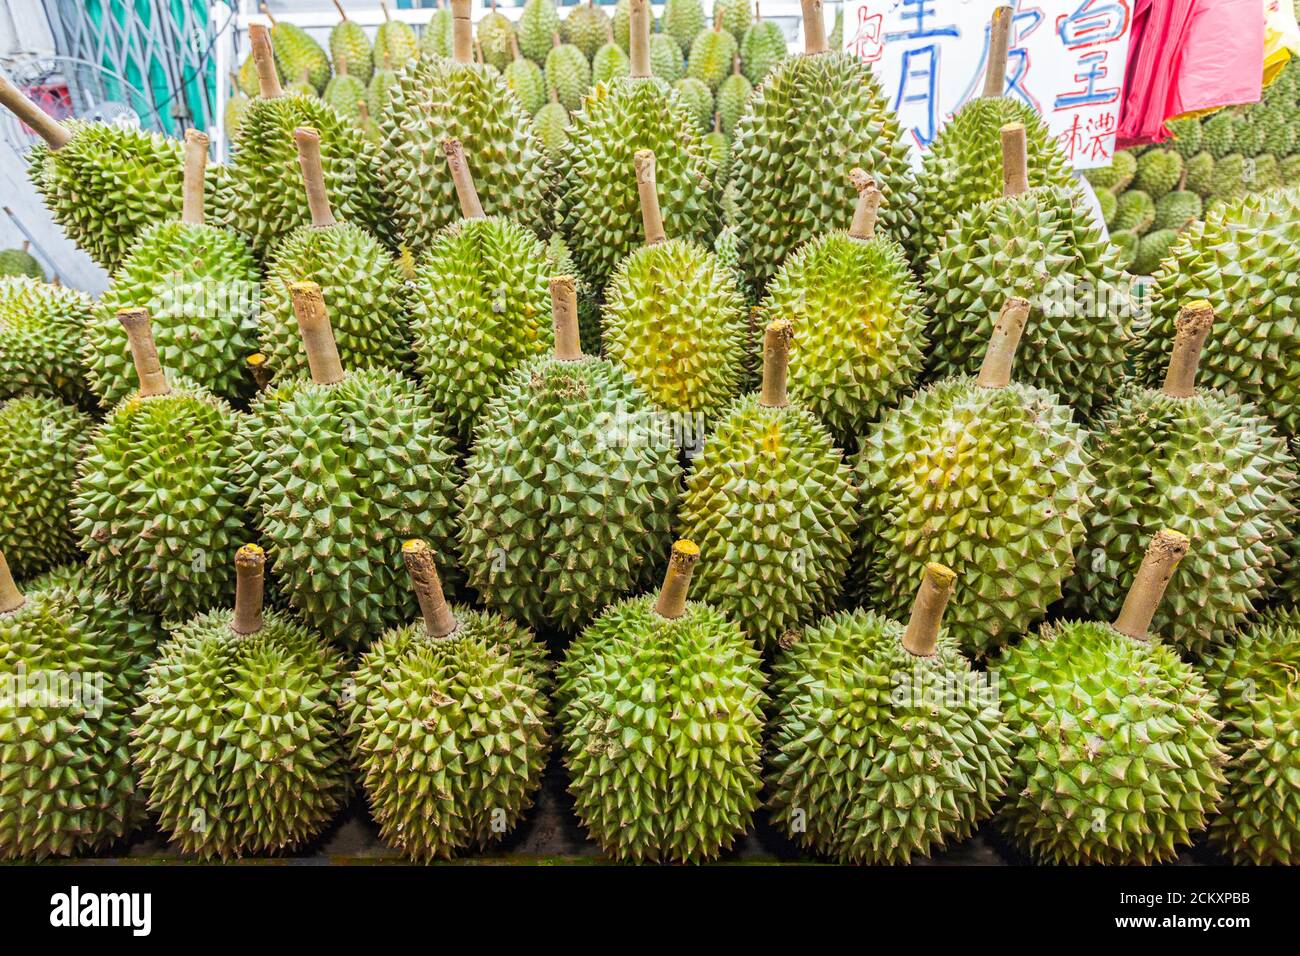 Famously smelly durian fruit, for sale at a night market in Singapore. The sickly sweet smell from this fruit is so intense, it is banned from some public transportation and hotels in tropical Asia. Stock Photo